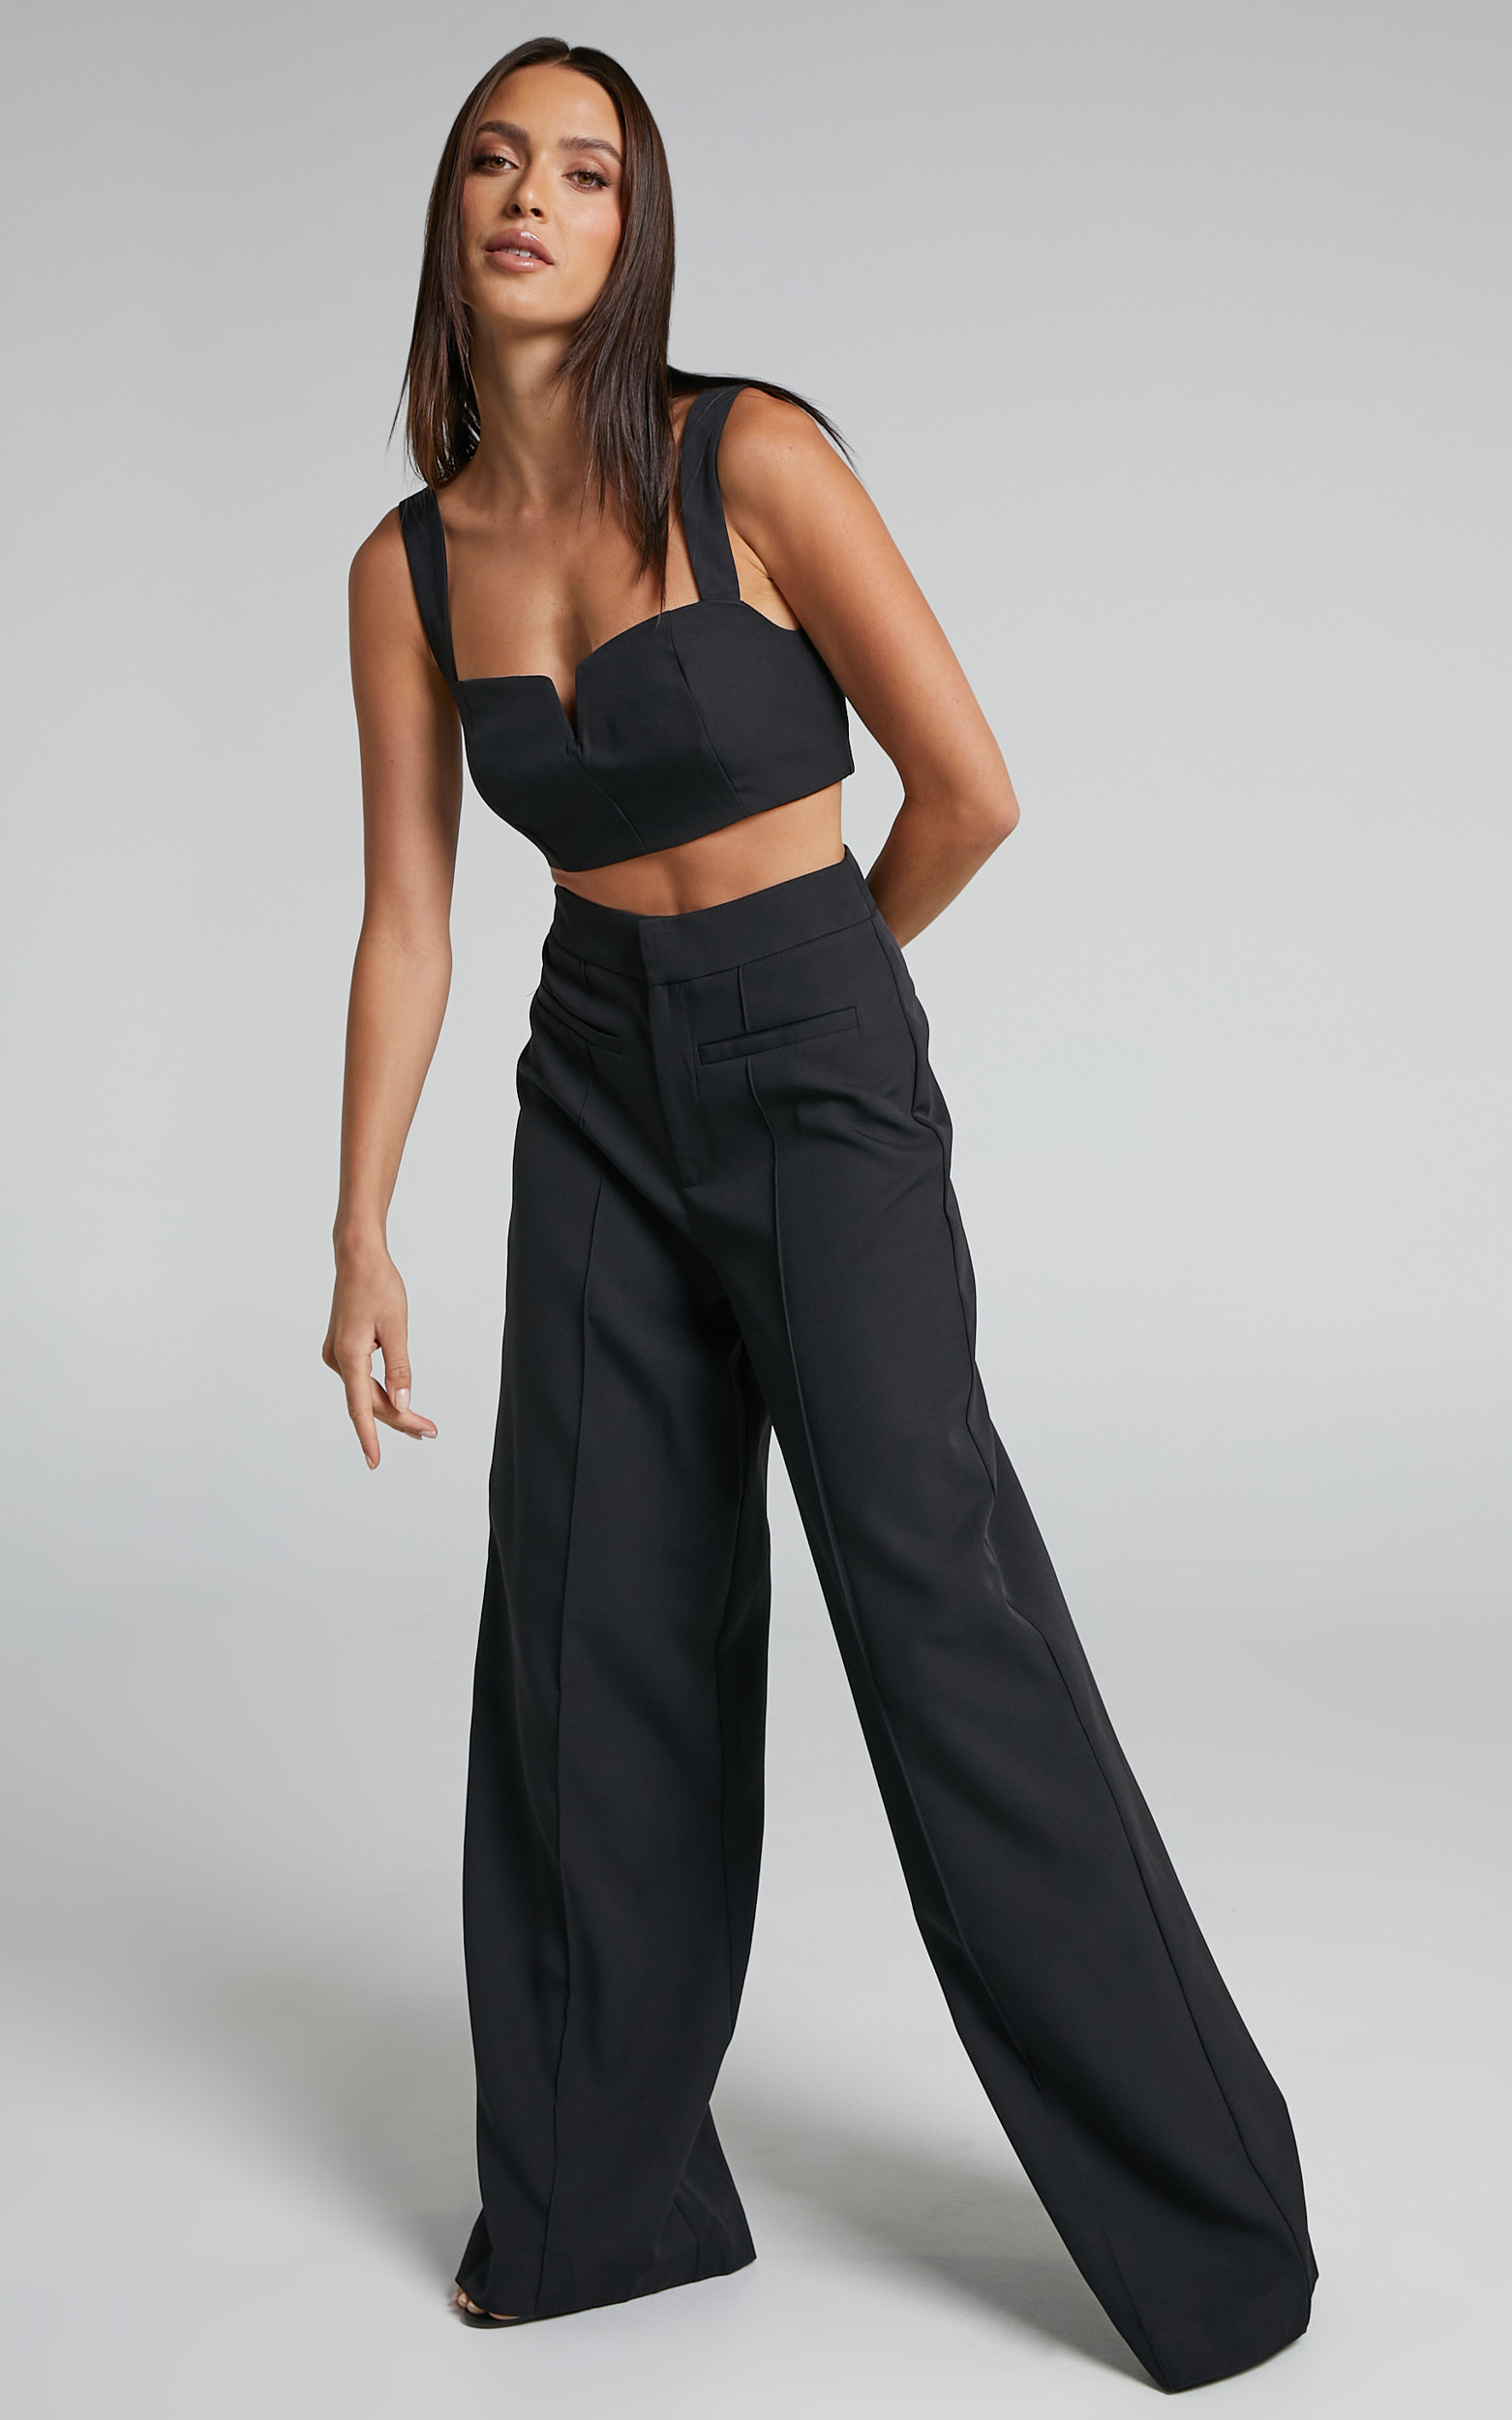 Maida V-Front Crop Top and Wide Leg Pants Two Piece Set in Black - 04, BLK1, hi-res image number null